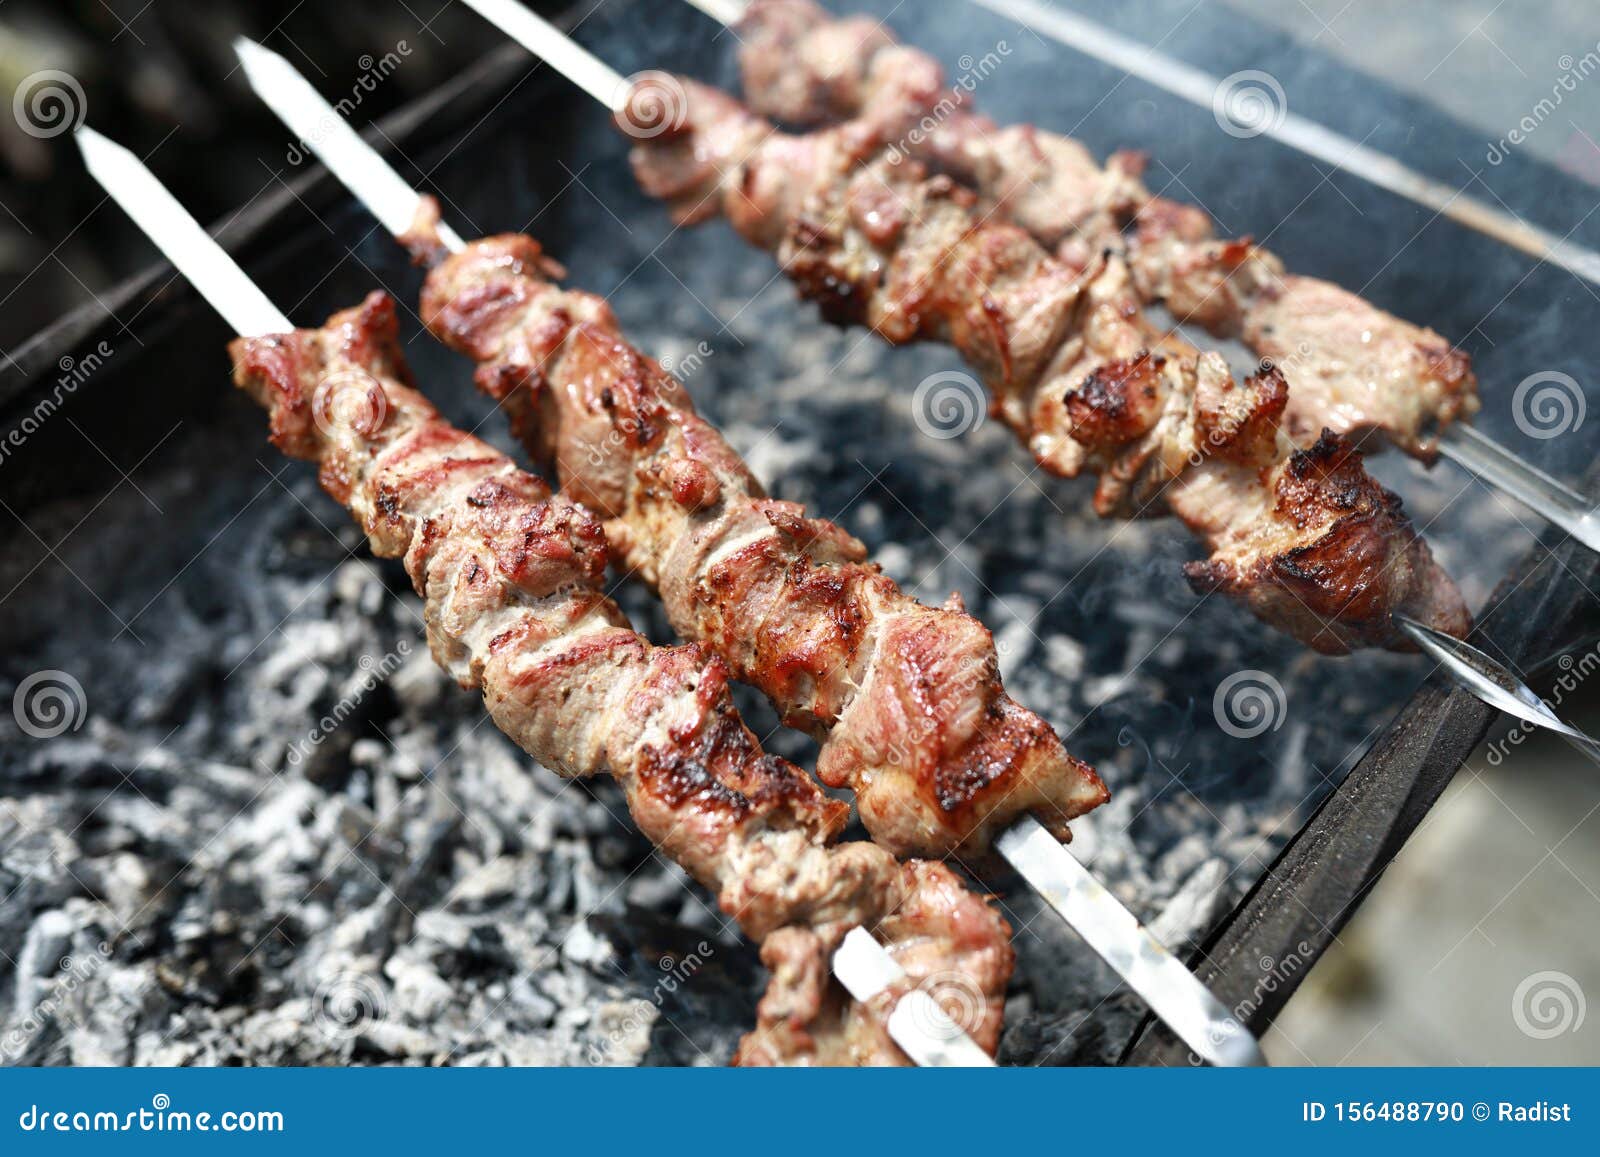 Cooking barbecue pork neck stock photo. Image of delicious - 156488790